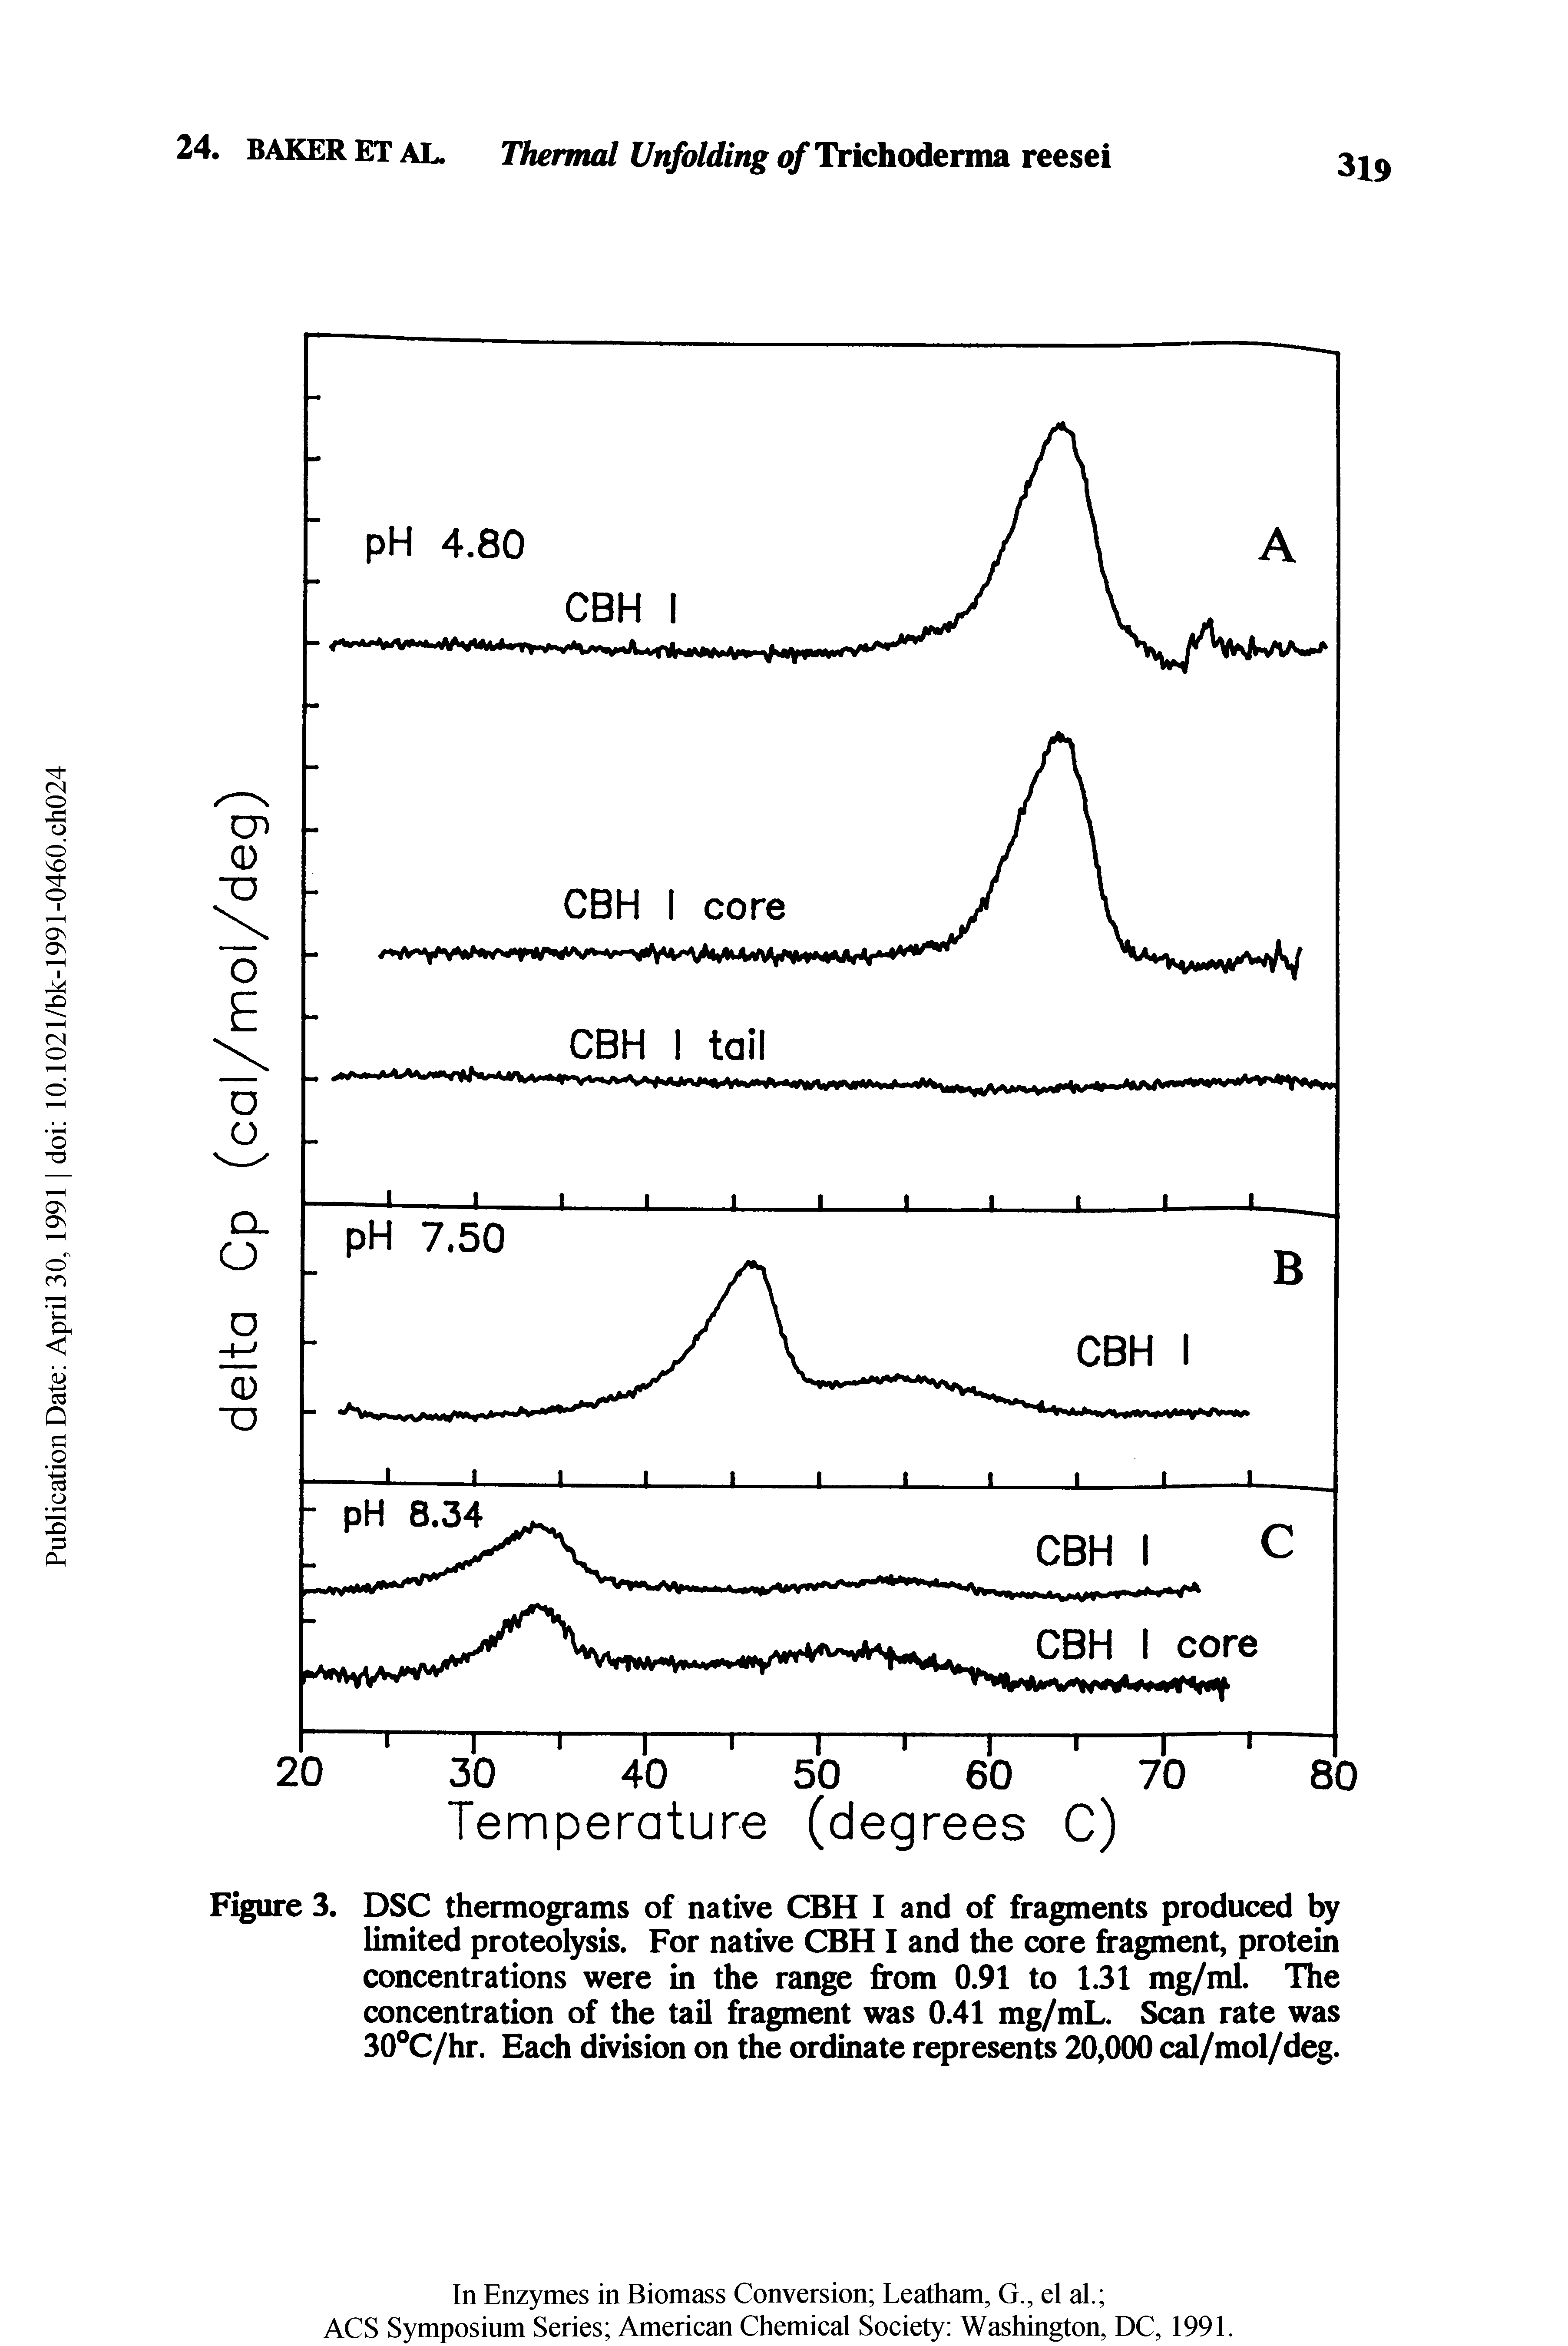 Figure 3. DSC thermograms of native CBH I and of fragments produced by limited proteolysis. For native CBH I and the core fragment, protein concentrations were in the range from 0.91 to 1.31 mg/ml. The concentration of the tail fragment was 0.41 mg/mL. Scan rate was 30 C/hr. Each division on the ordinate represents 20,000 cal/mol/deg.